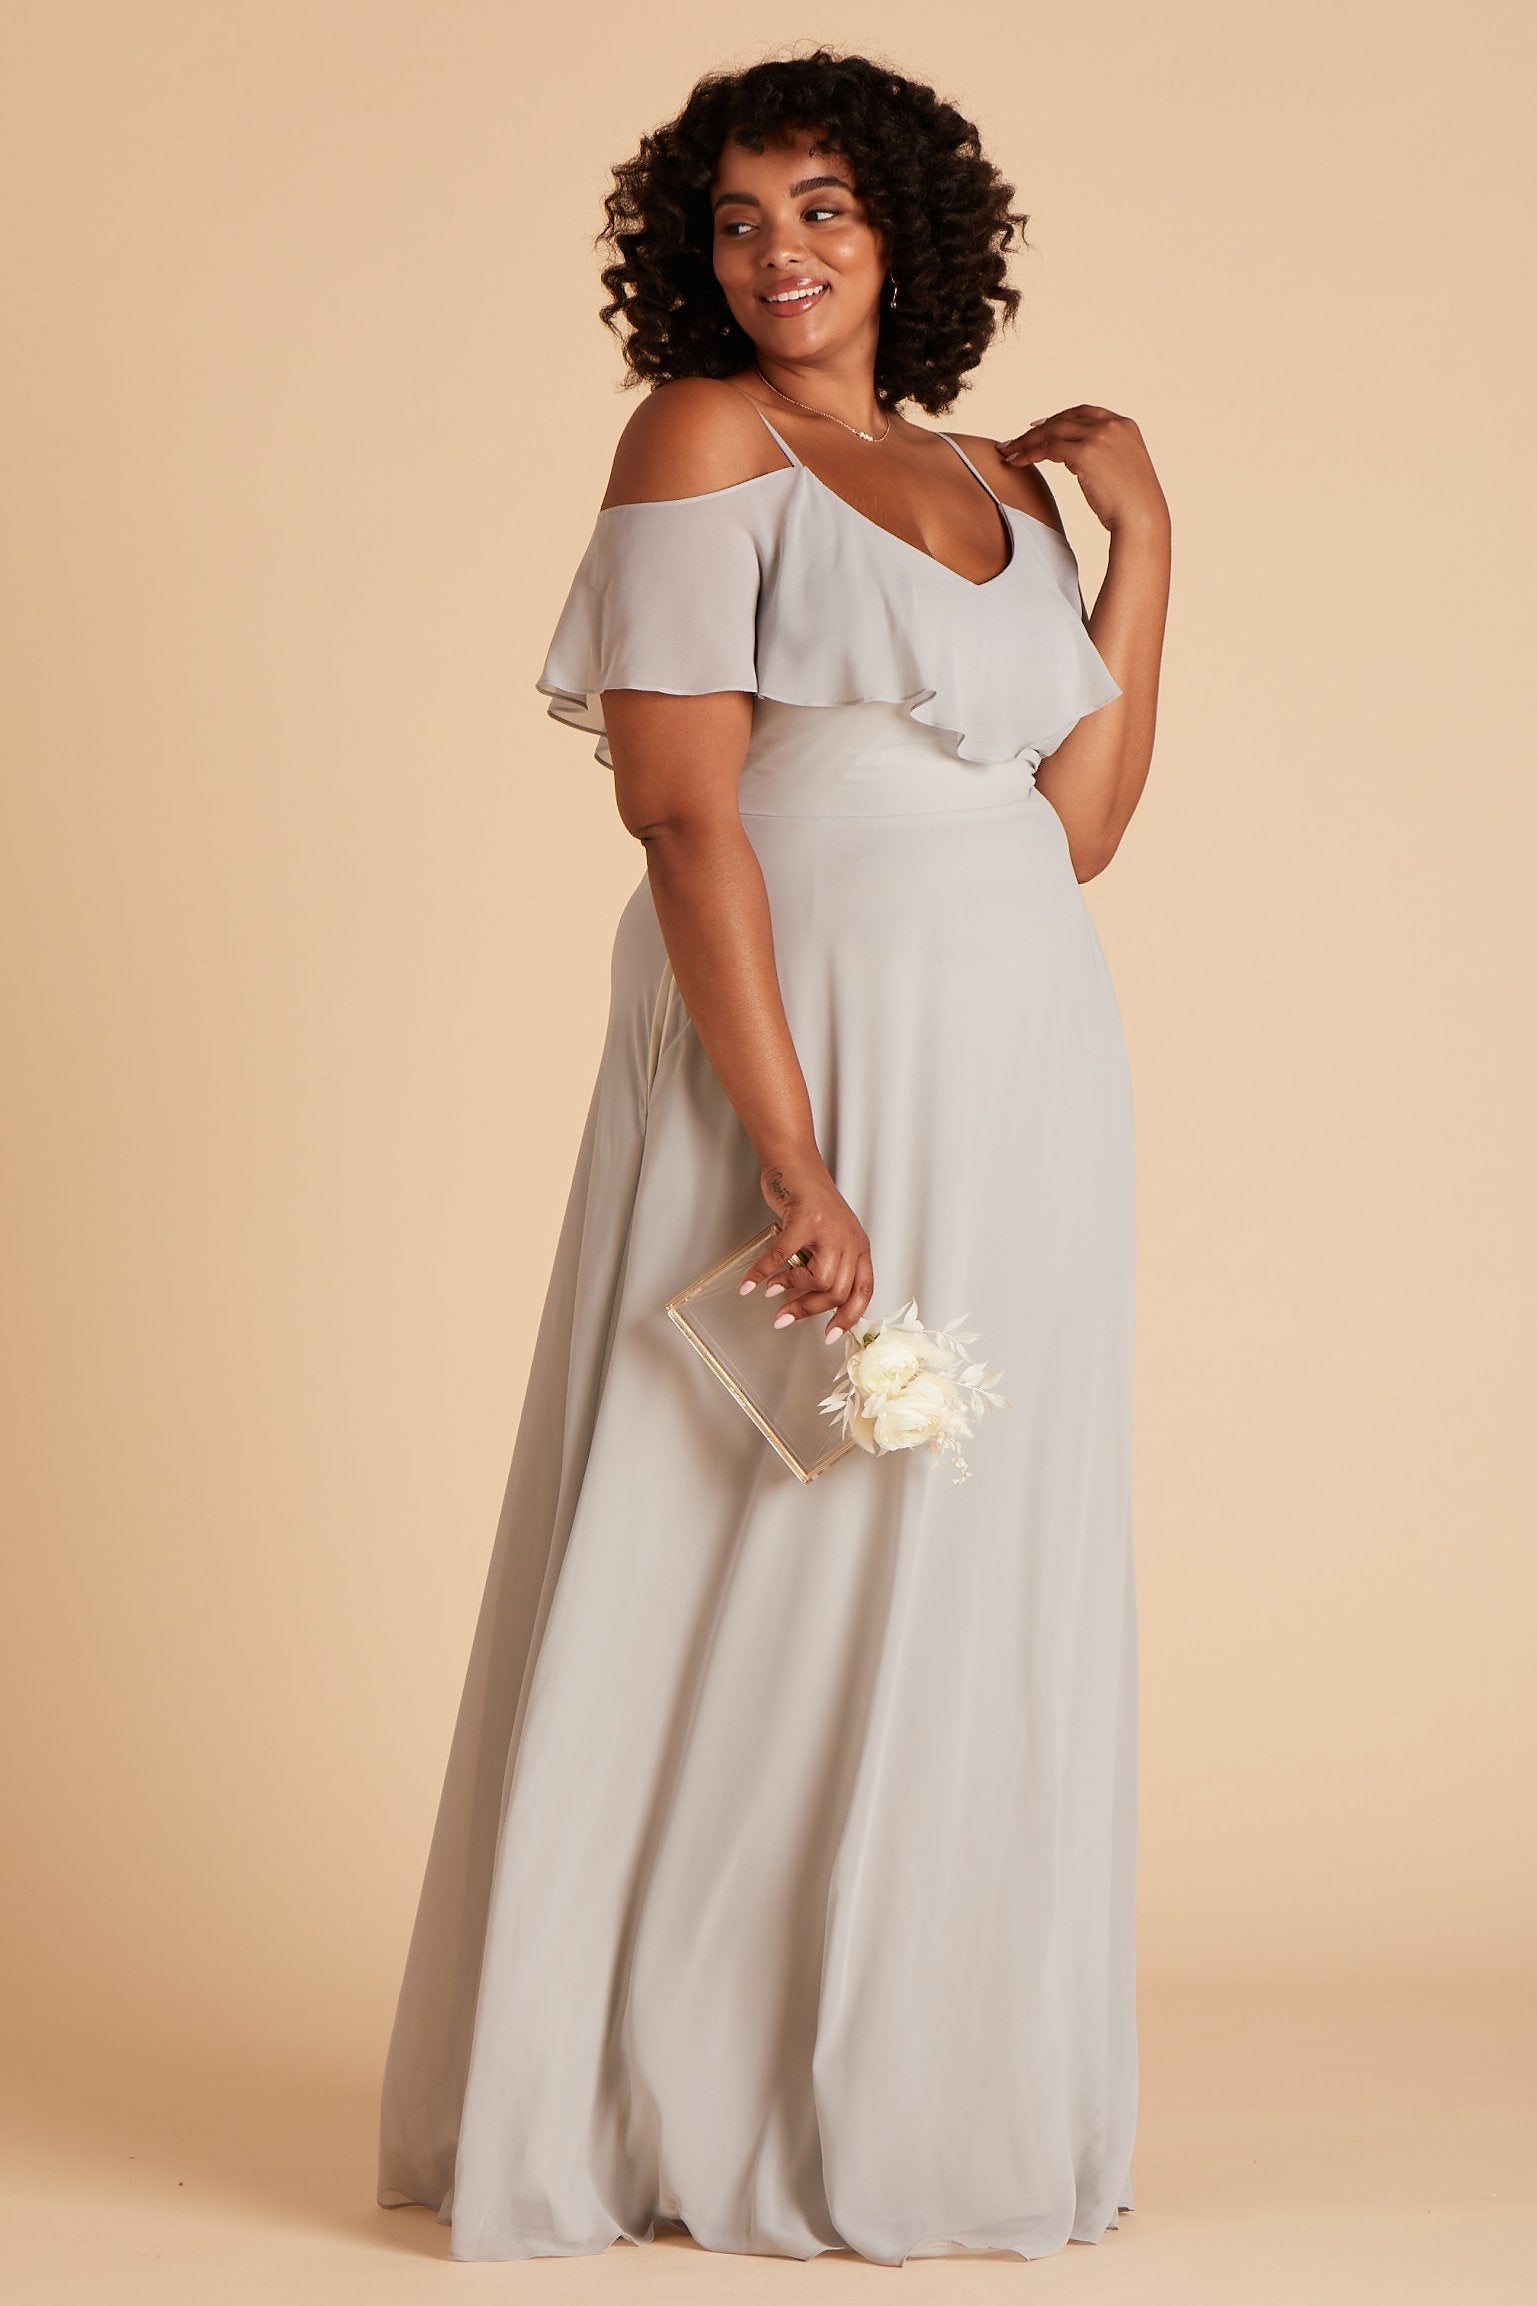 Jane convertible plus size bridesmaid dress in dove gray chiffon by Birdy Grey, side view